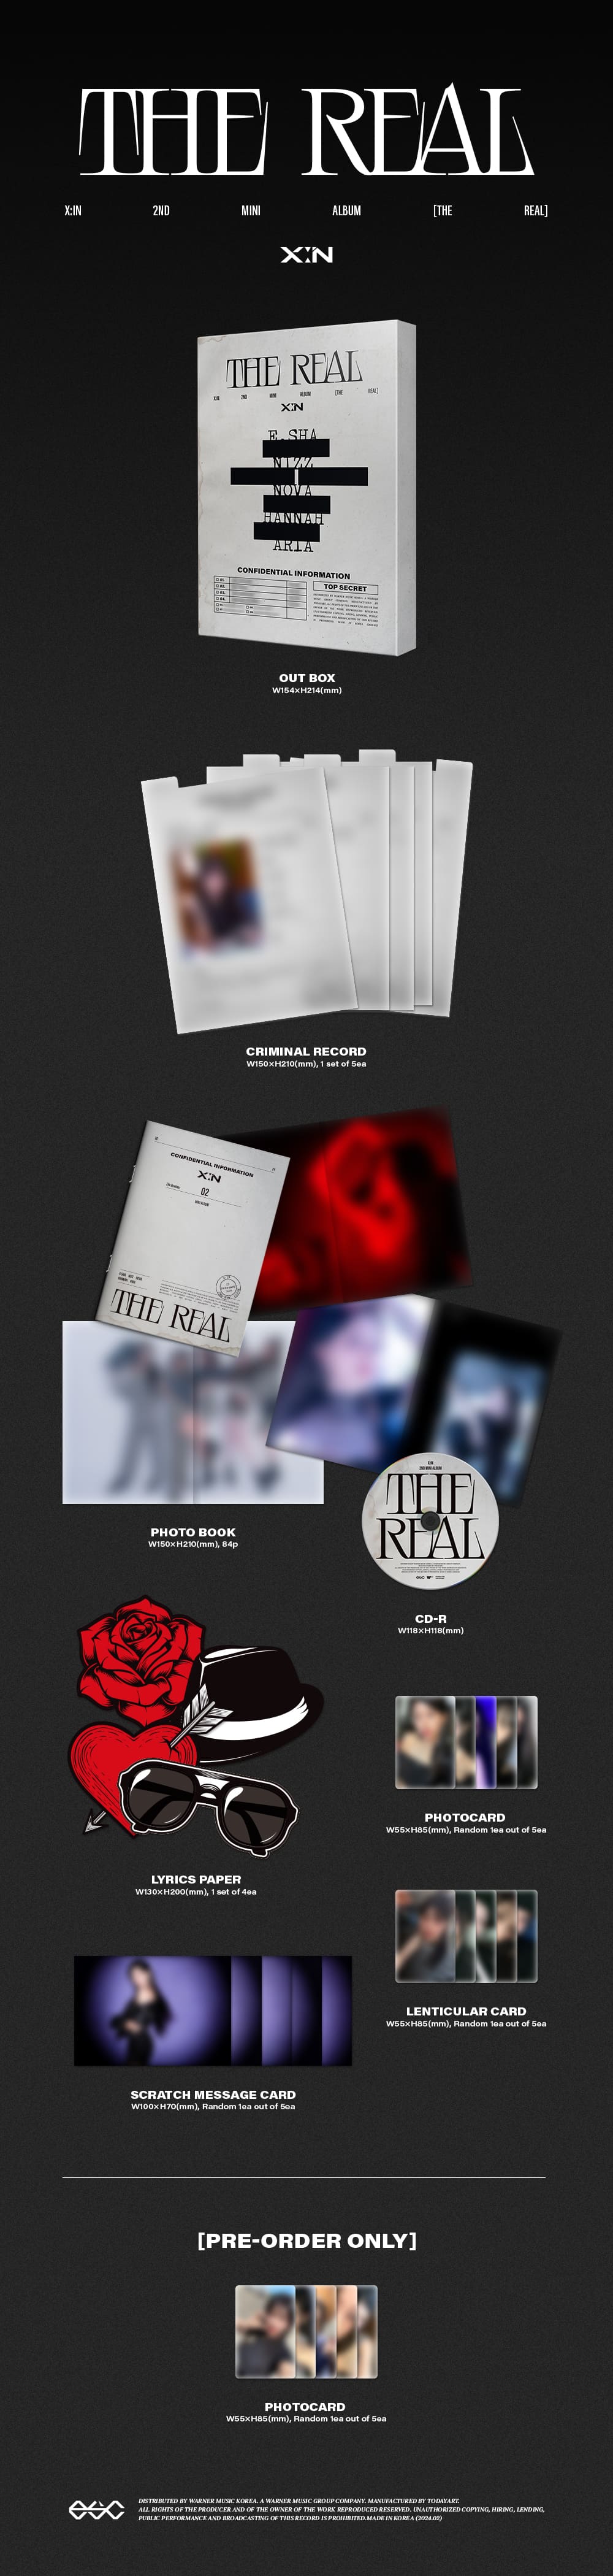 X:IN 2nd Mini Album THE REAL